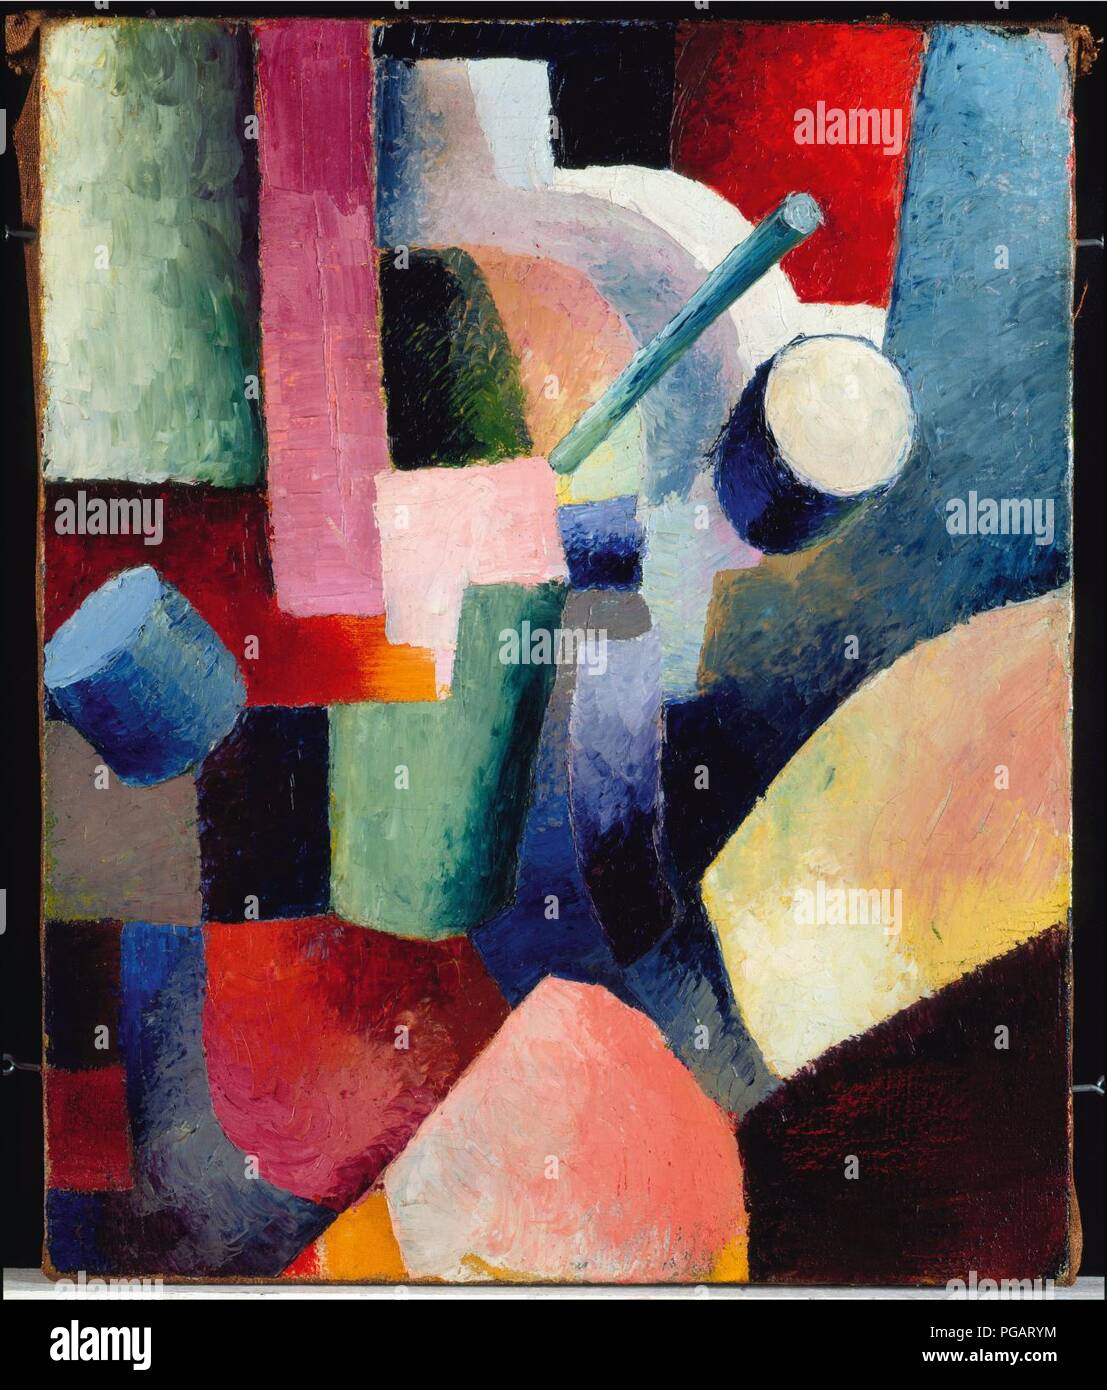 August Macke - Colored Composition of Forms, 1914 - Stock Photo